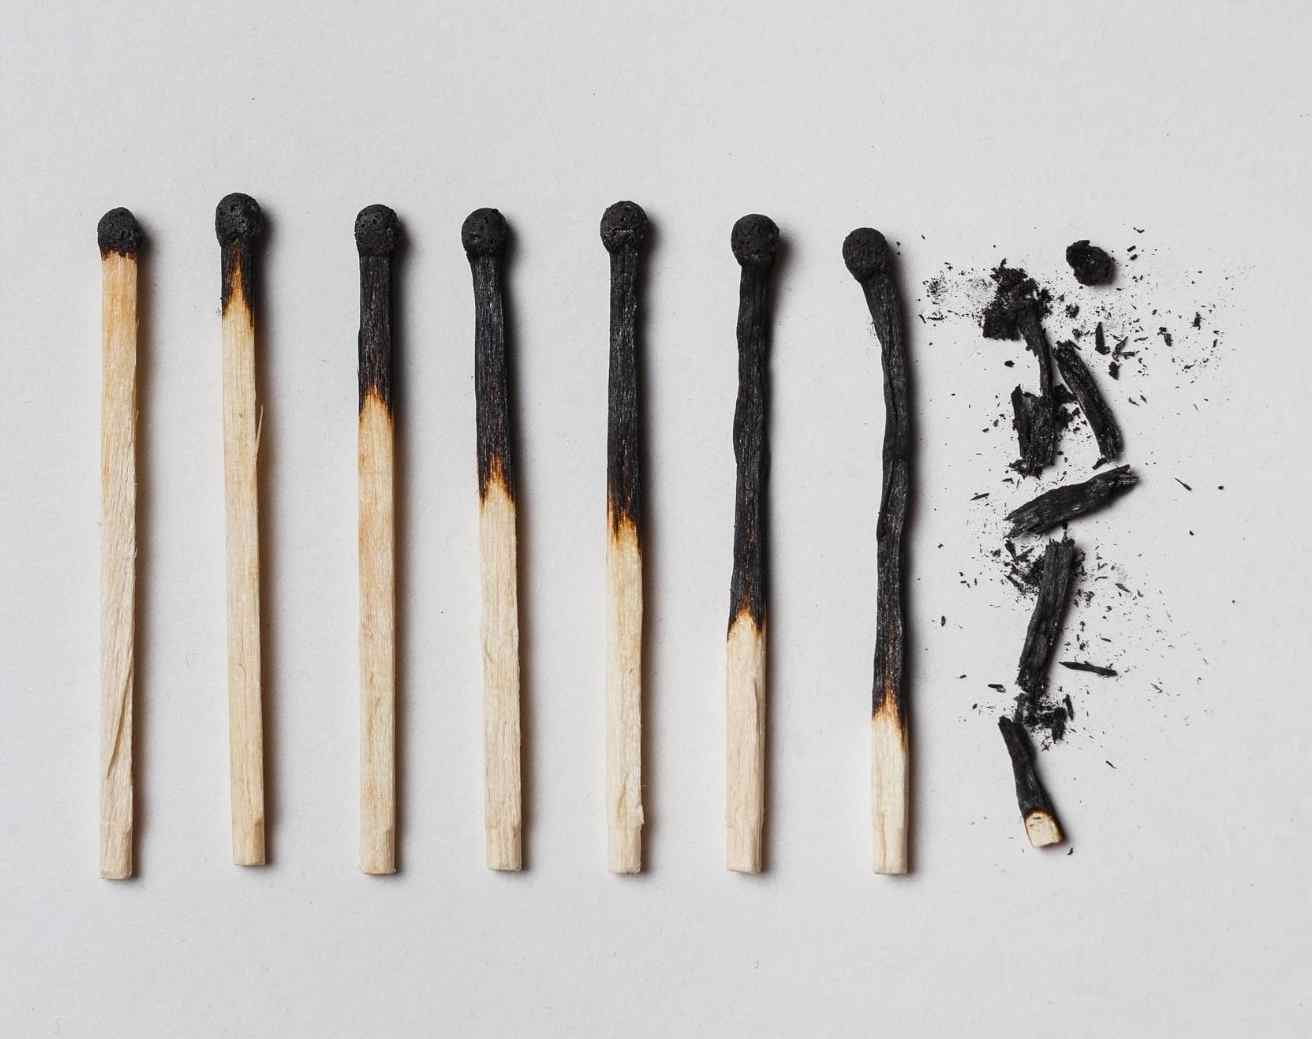 Burned out matches